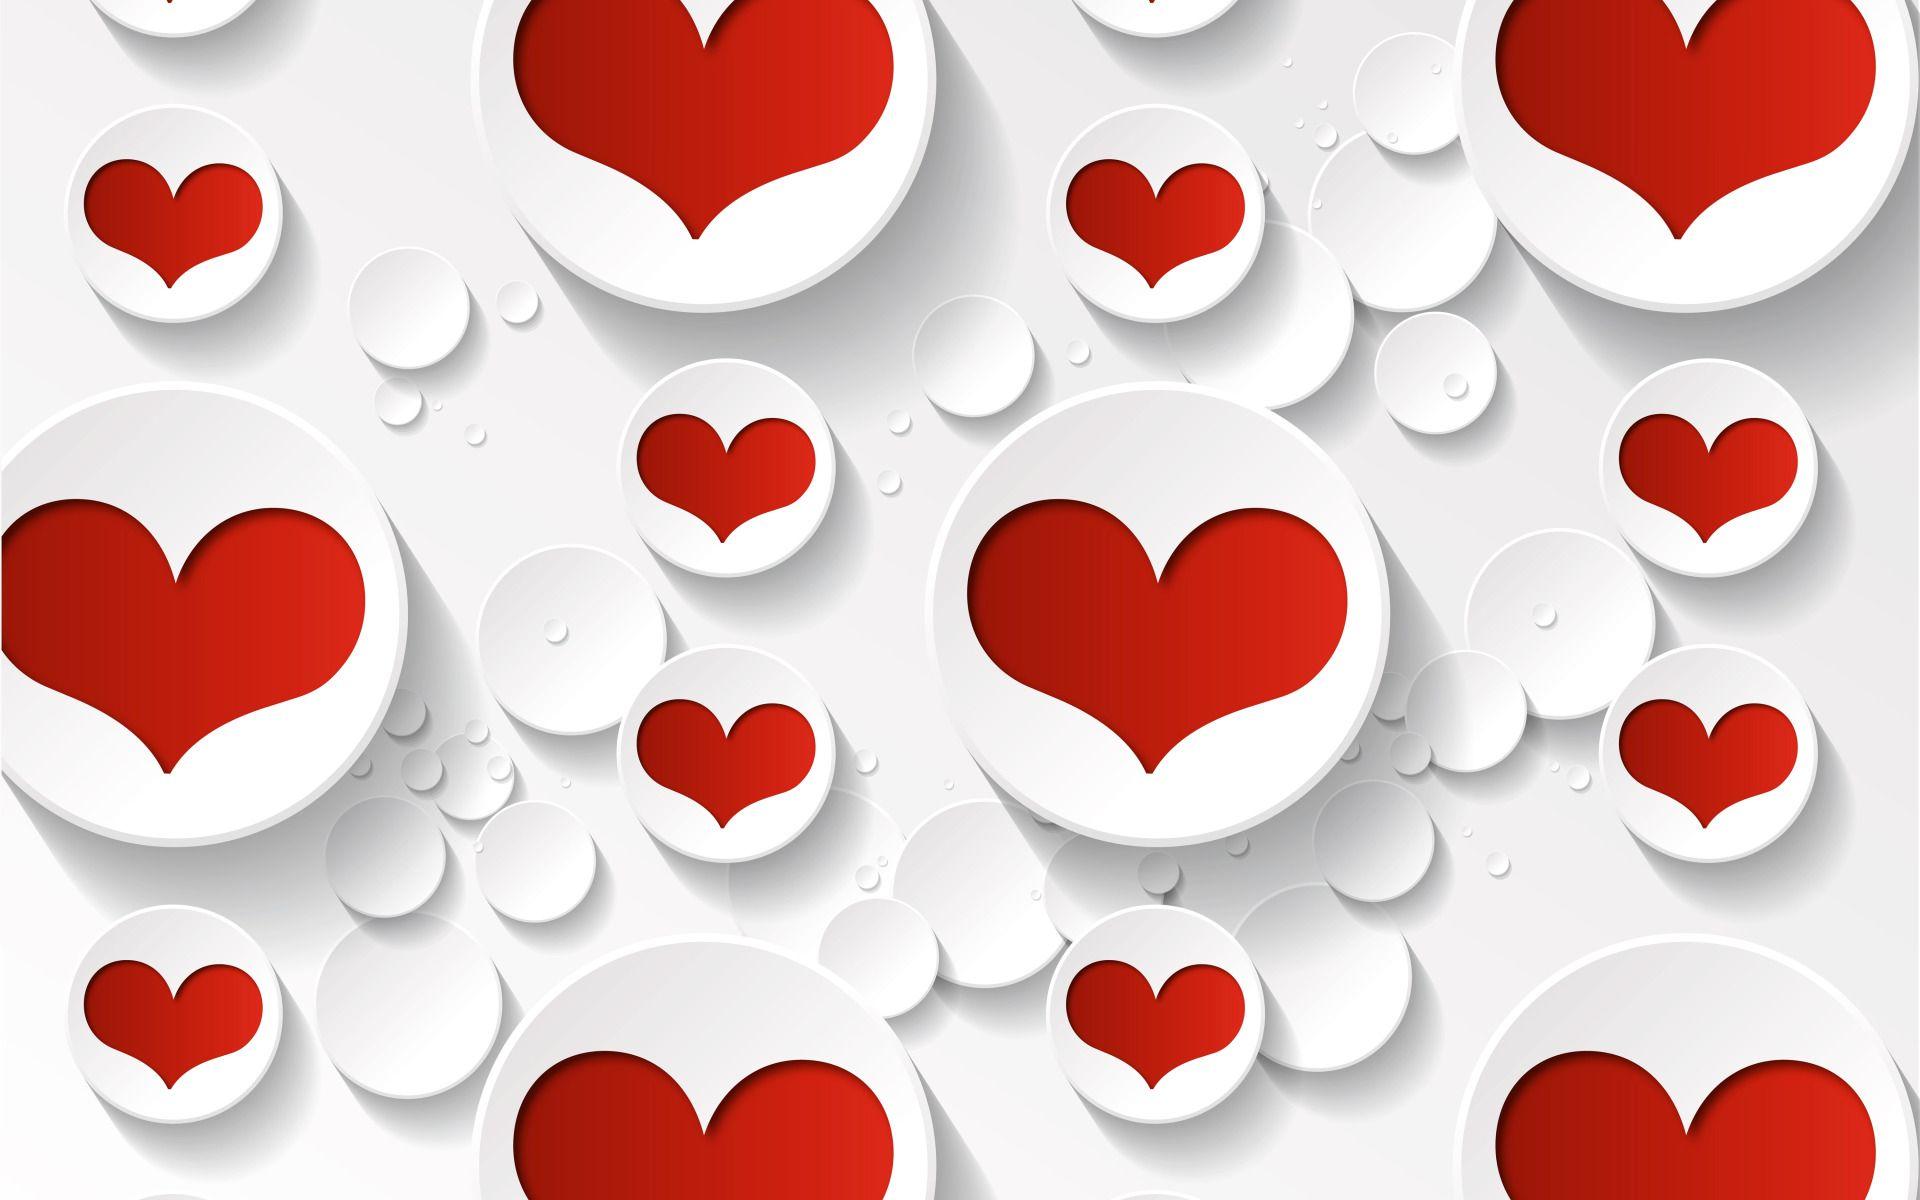 Valentine's Day Red and White Hearts widescreen wallpaper. Wide